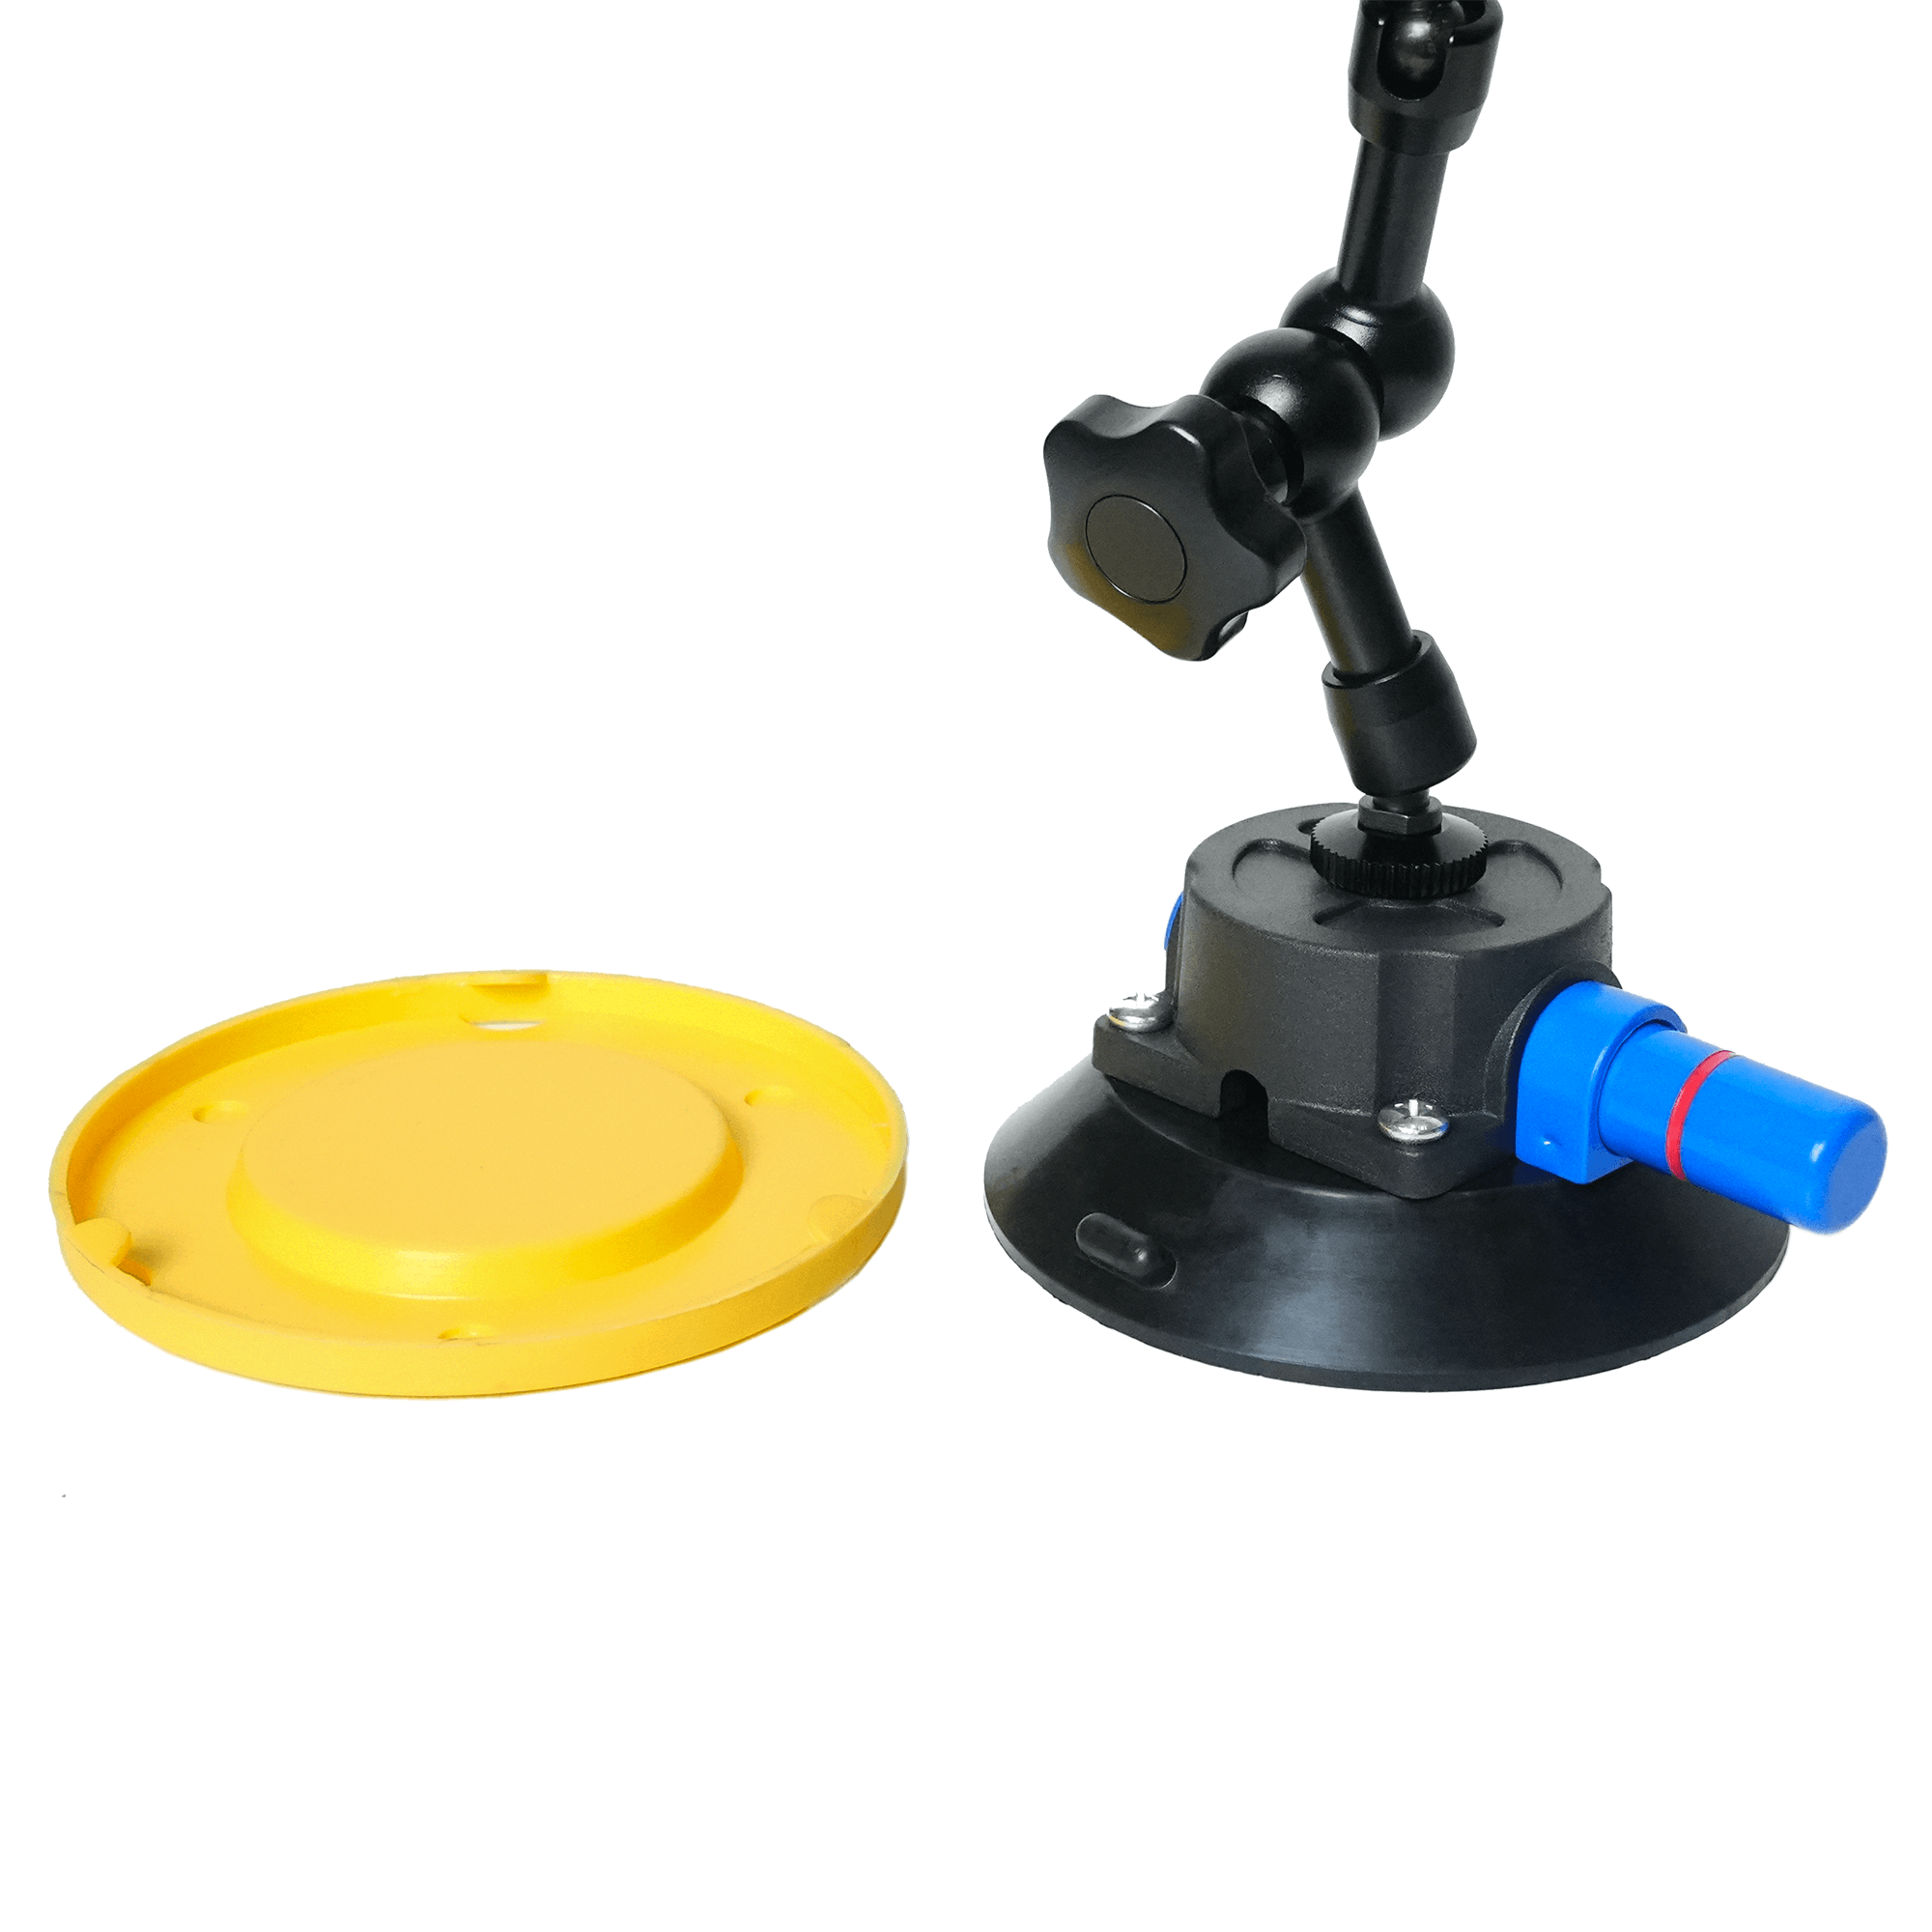 3 Articulating Arm Suction Cup Vehicle Mount for DSLR & Mirrorless